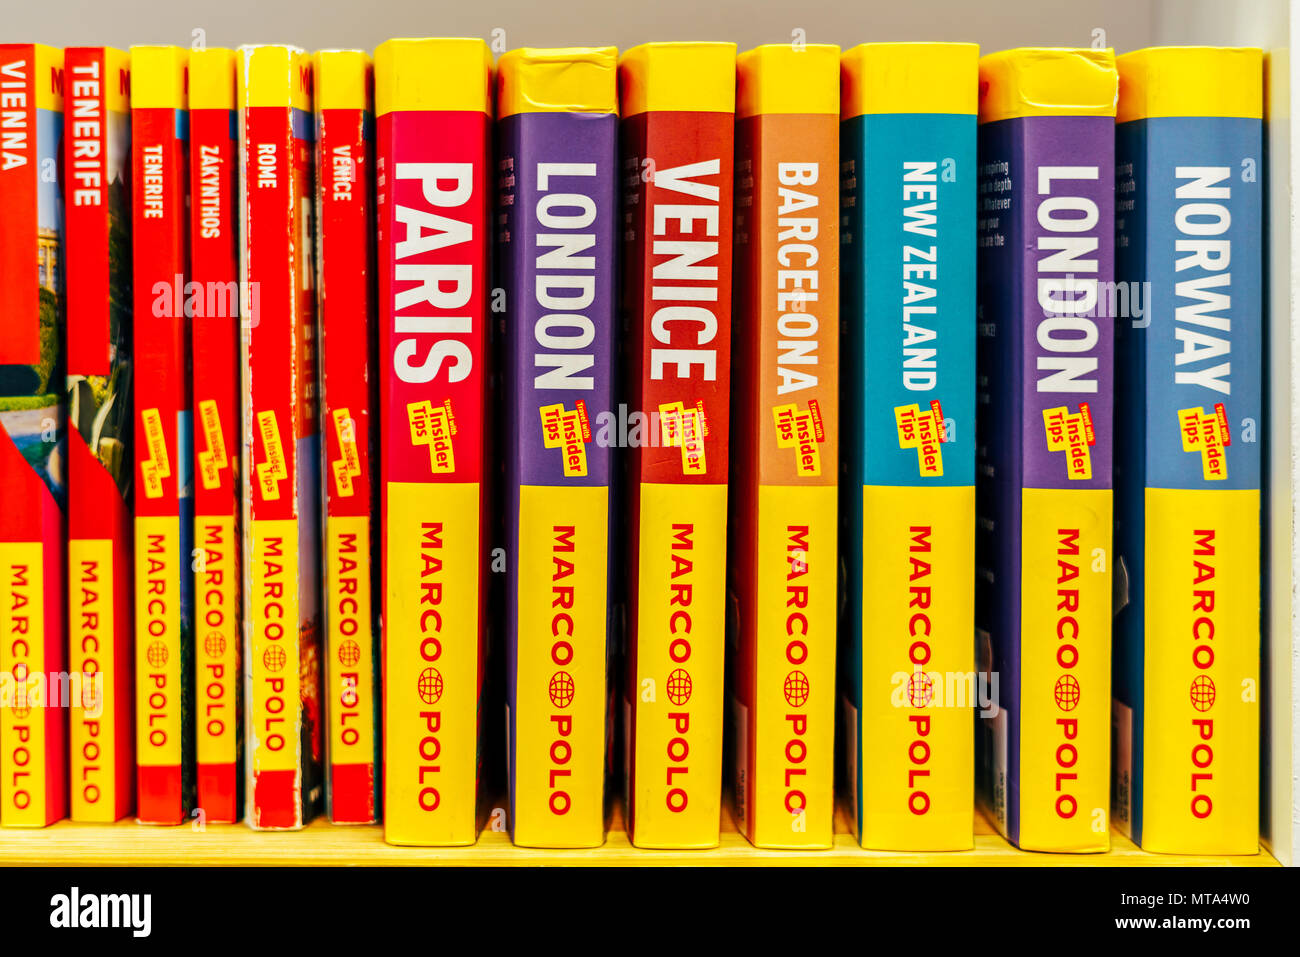 BUCHAREST, ROMANIA - MAY 27, 2018: Cities Of The World And Country Travel Books For Sale On Bookstore Shelf Stock Photo